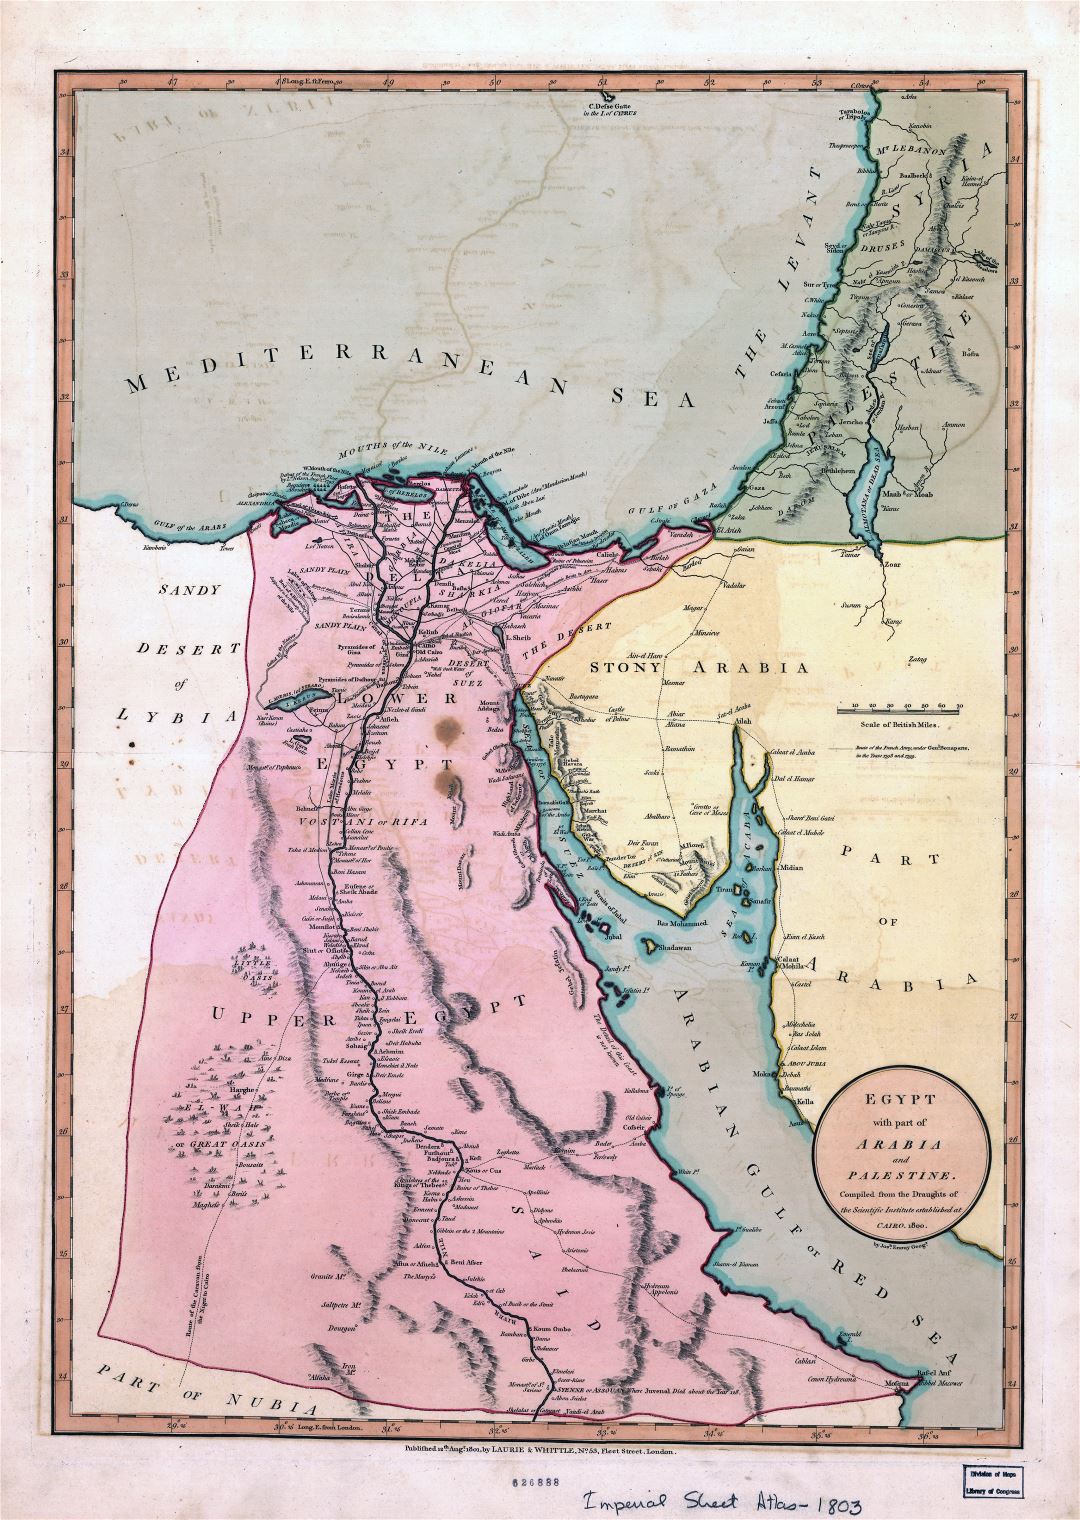 Large detailed old map of Egypt with part of Arabia and Palestine - 1800